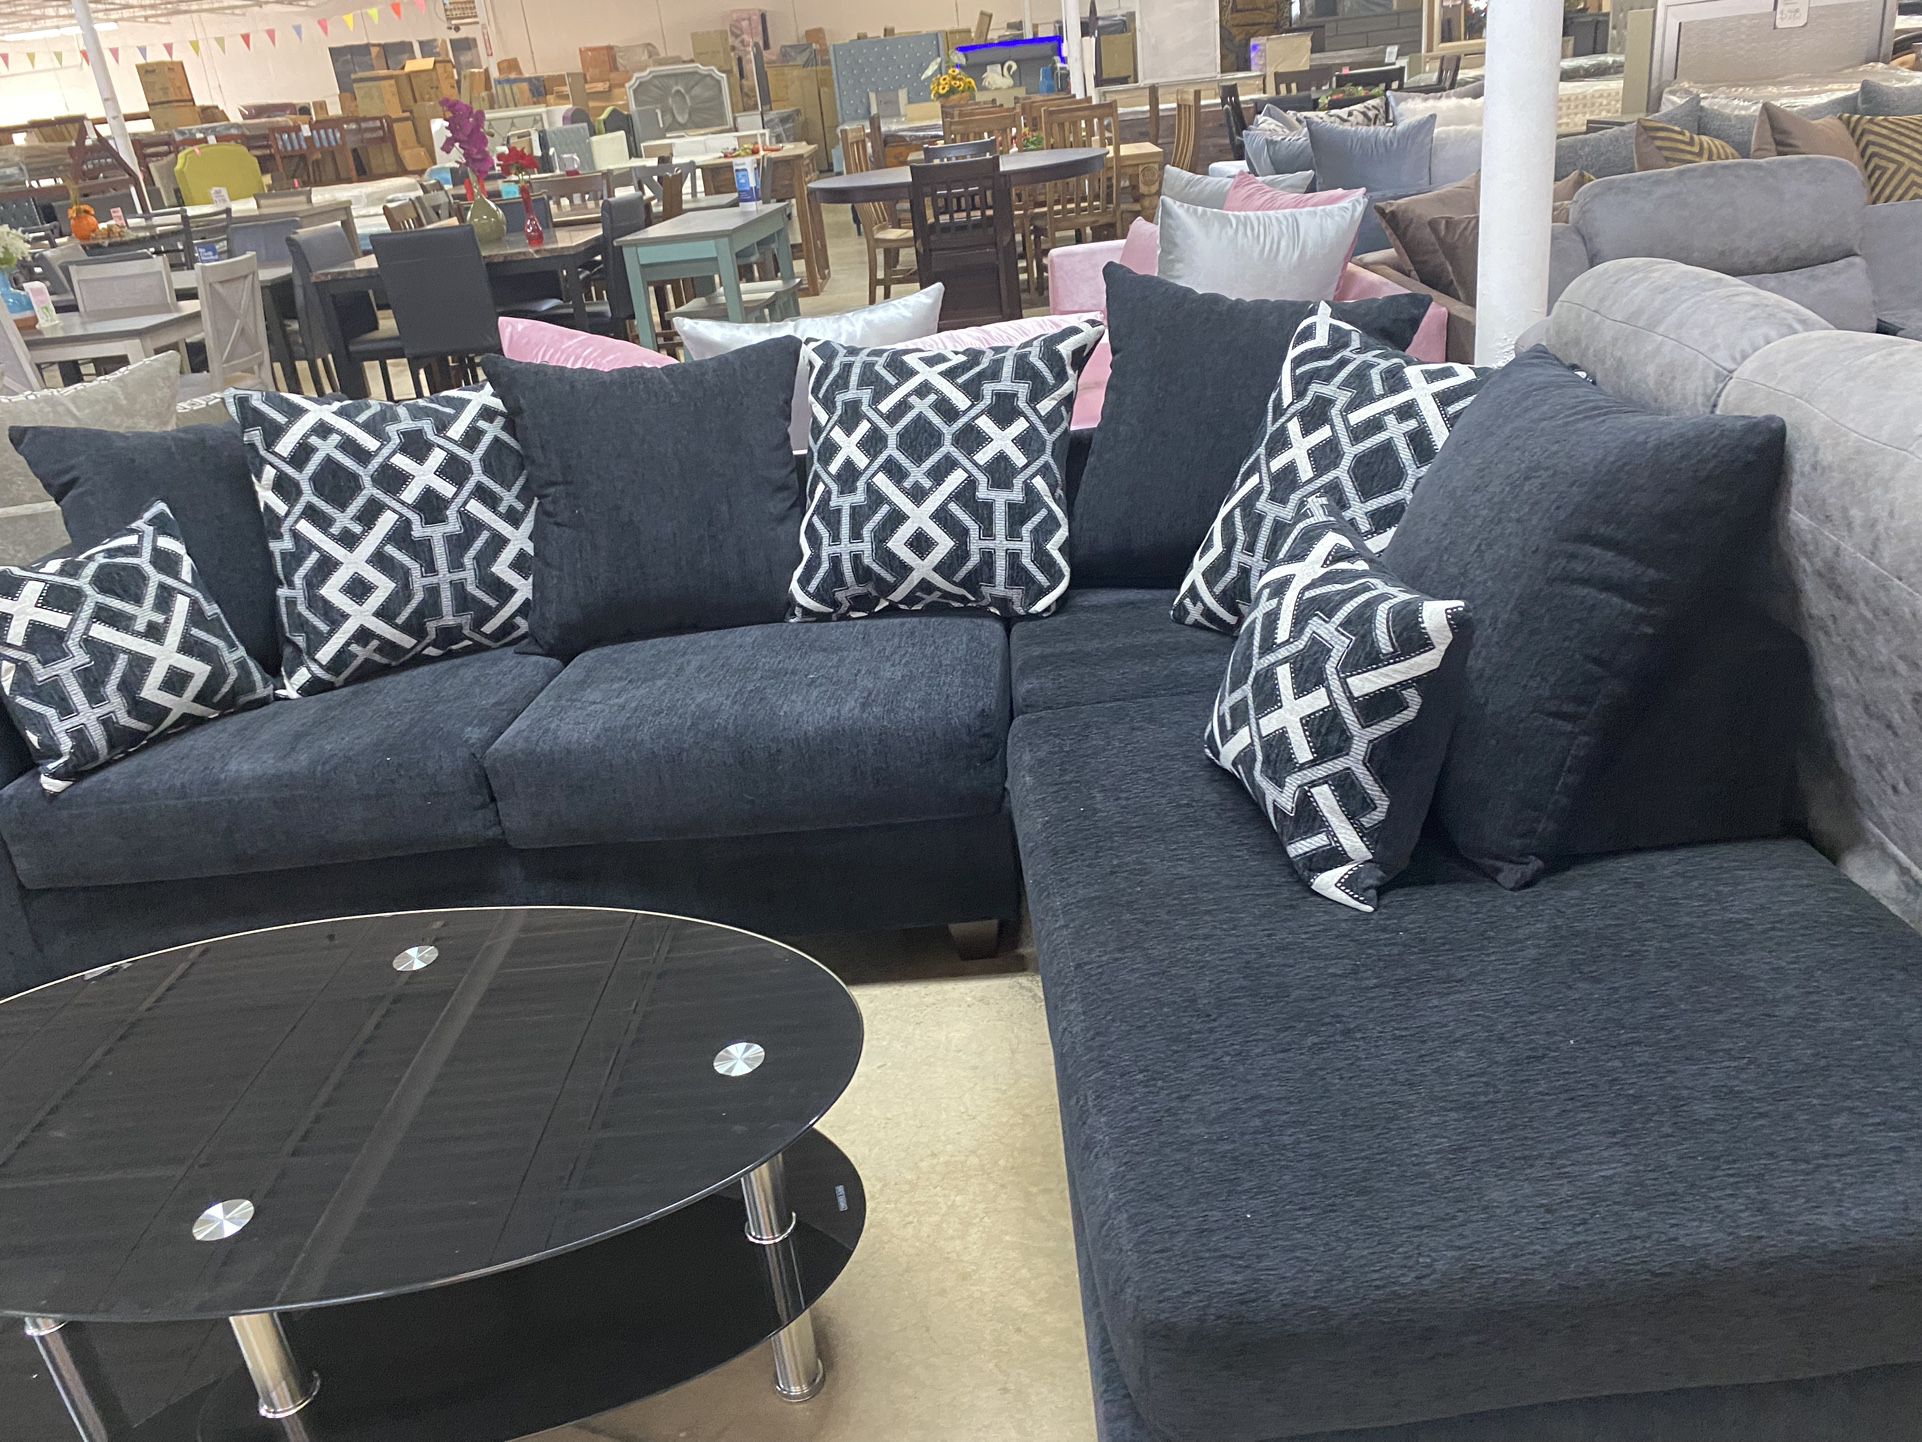 Brand New Sectional